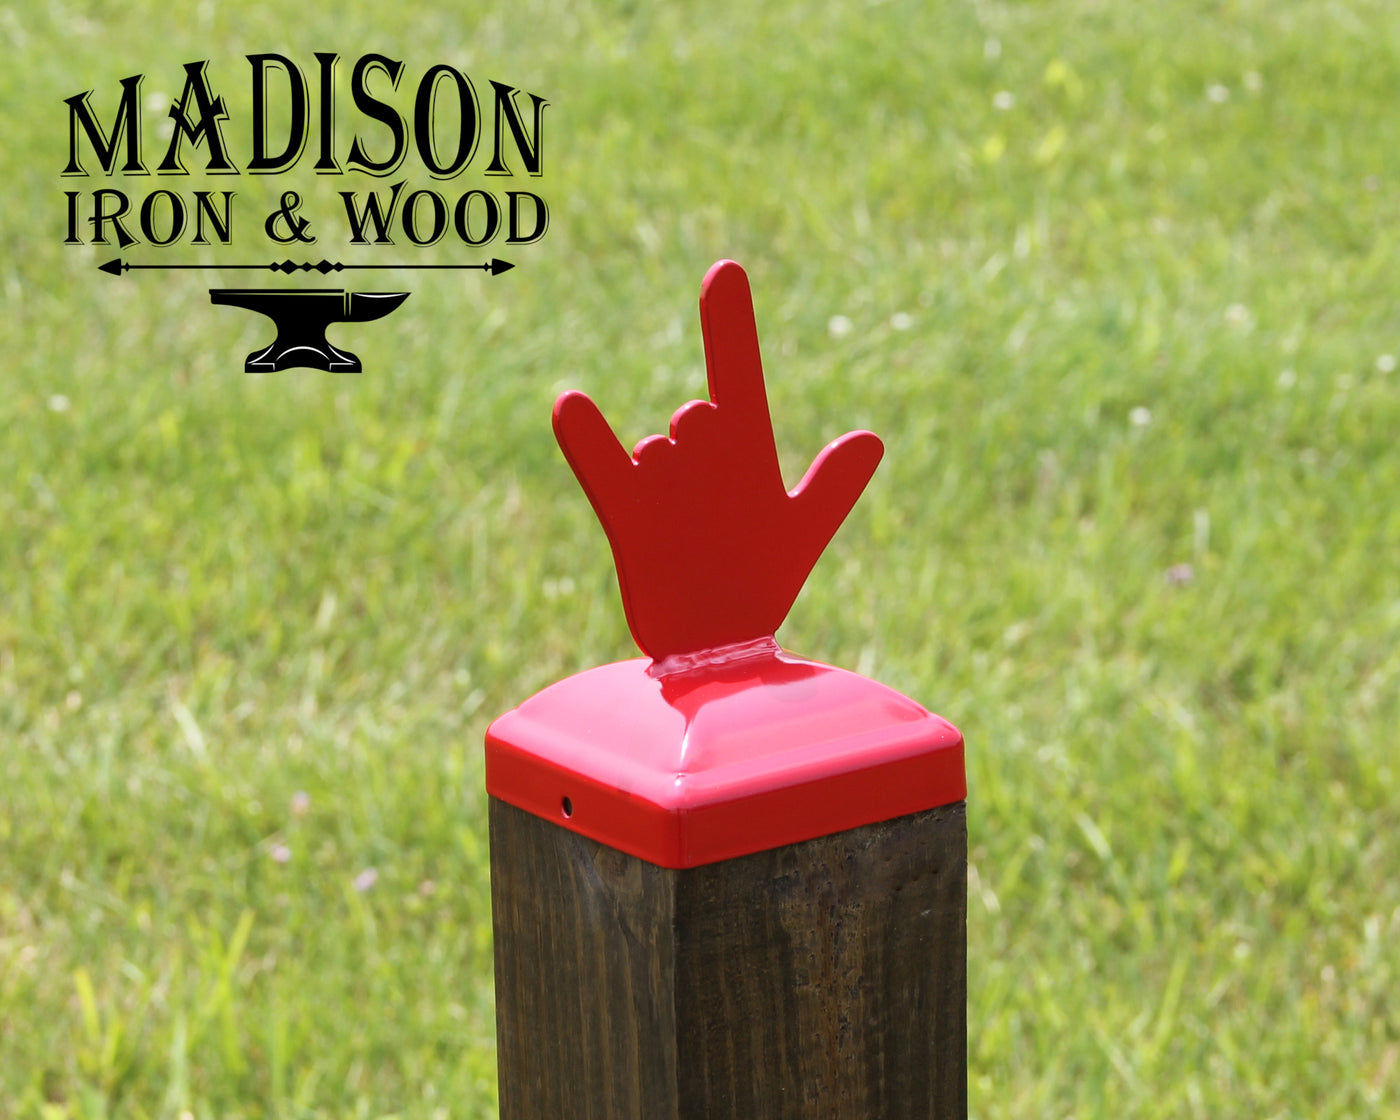 4x4 Love Hand Gesture Post Cap - Madison Iron and Wood - Post Cap - metal outdoor decor - Steel deocrations - american made products - veteran owned business products - fencing decorations - fencing supplies - custom wall decorations - personalized wall signs - steel - decorative post caps - steel post caps - metal post caps - brackets - structural brackets - home improvement - easter - easter decorations - easter gift - easter yard decor